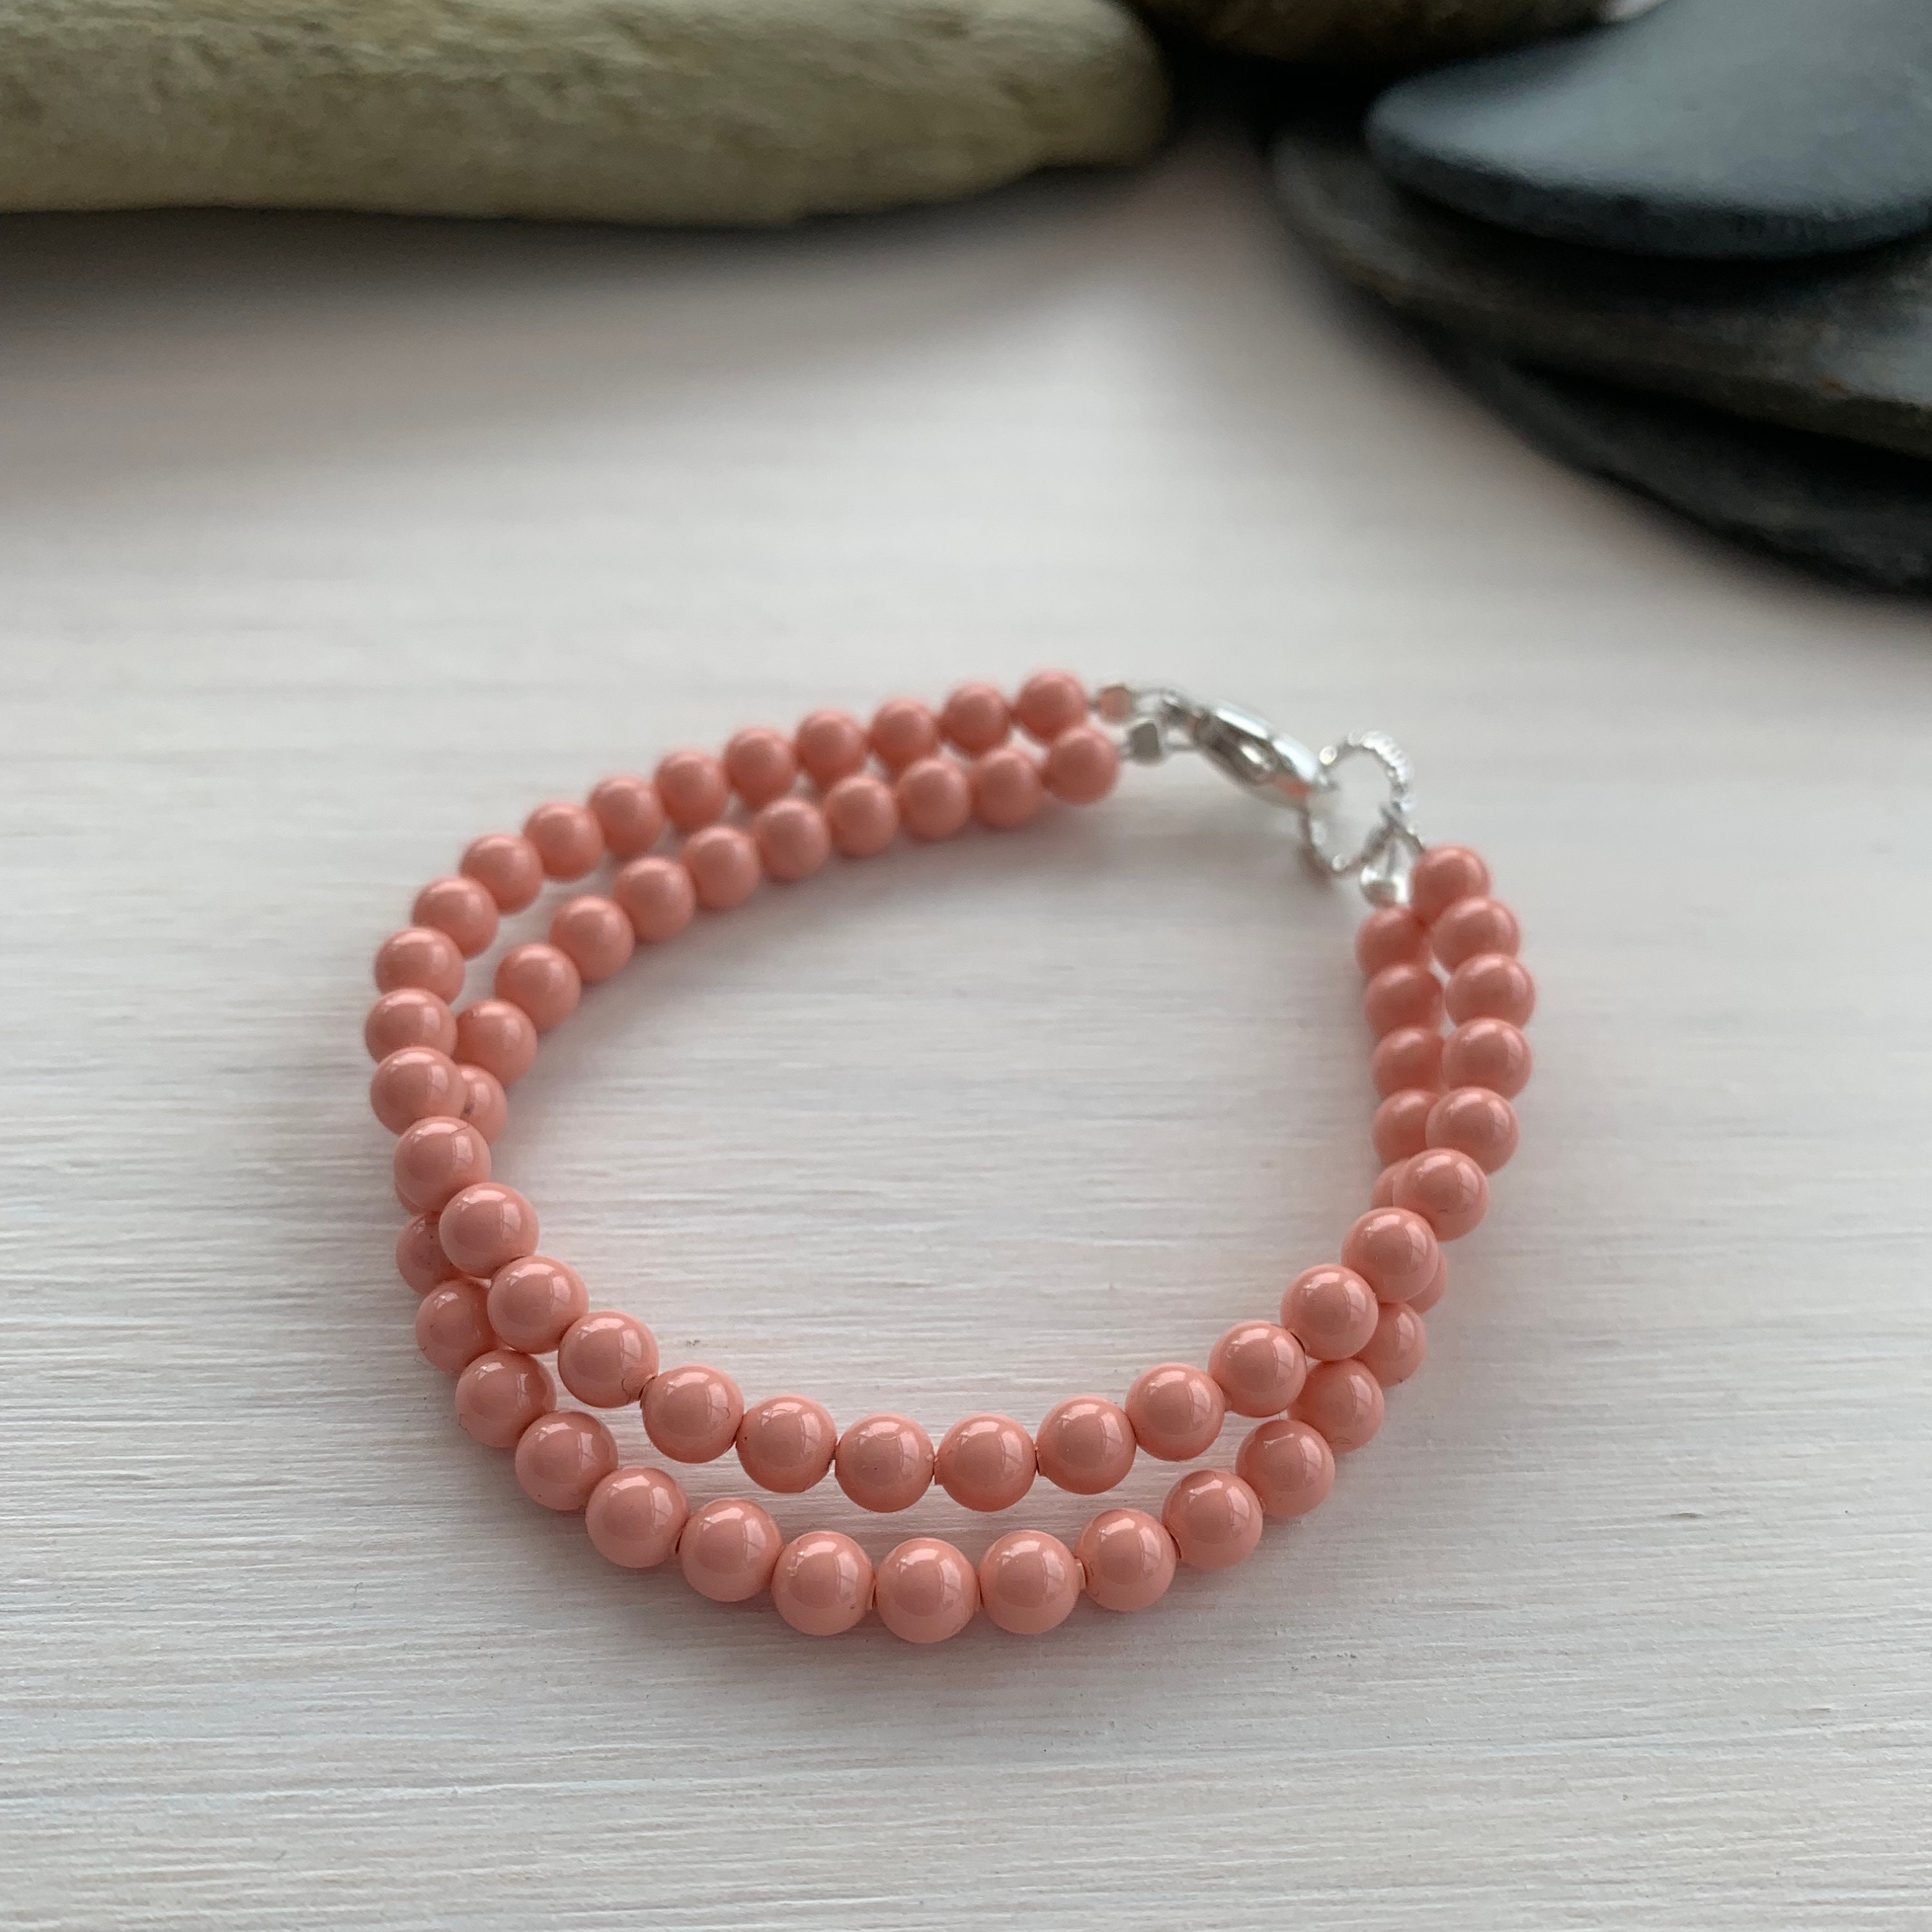 Handmade and Beaded Sherbet Green and White Pearl Bracelet with Coral Pink Accents